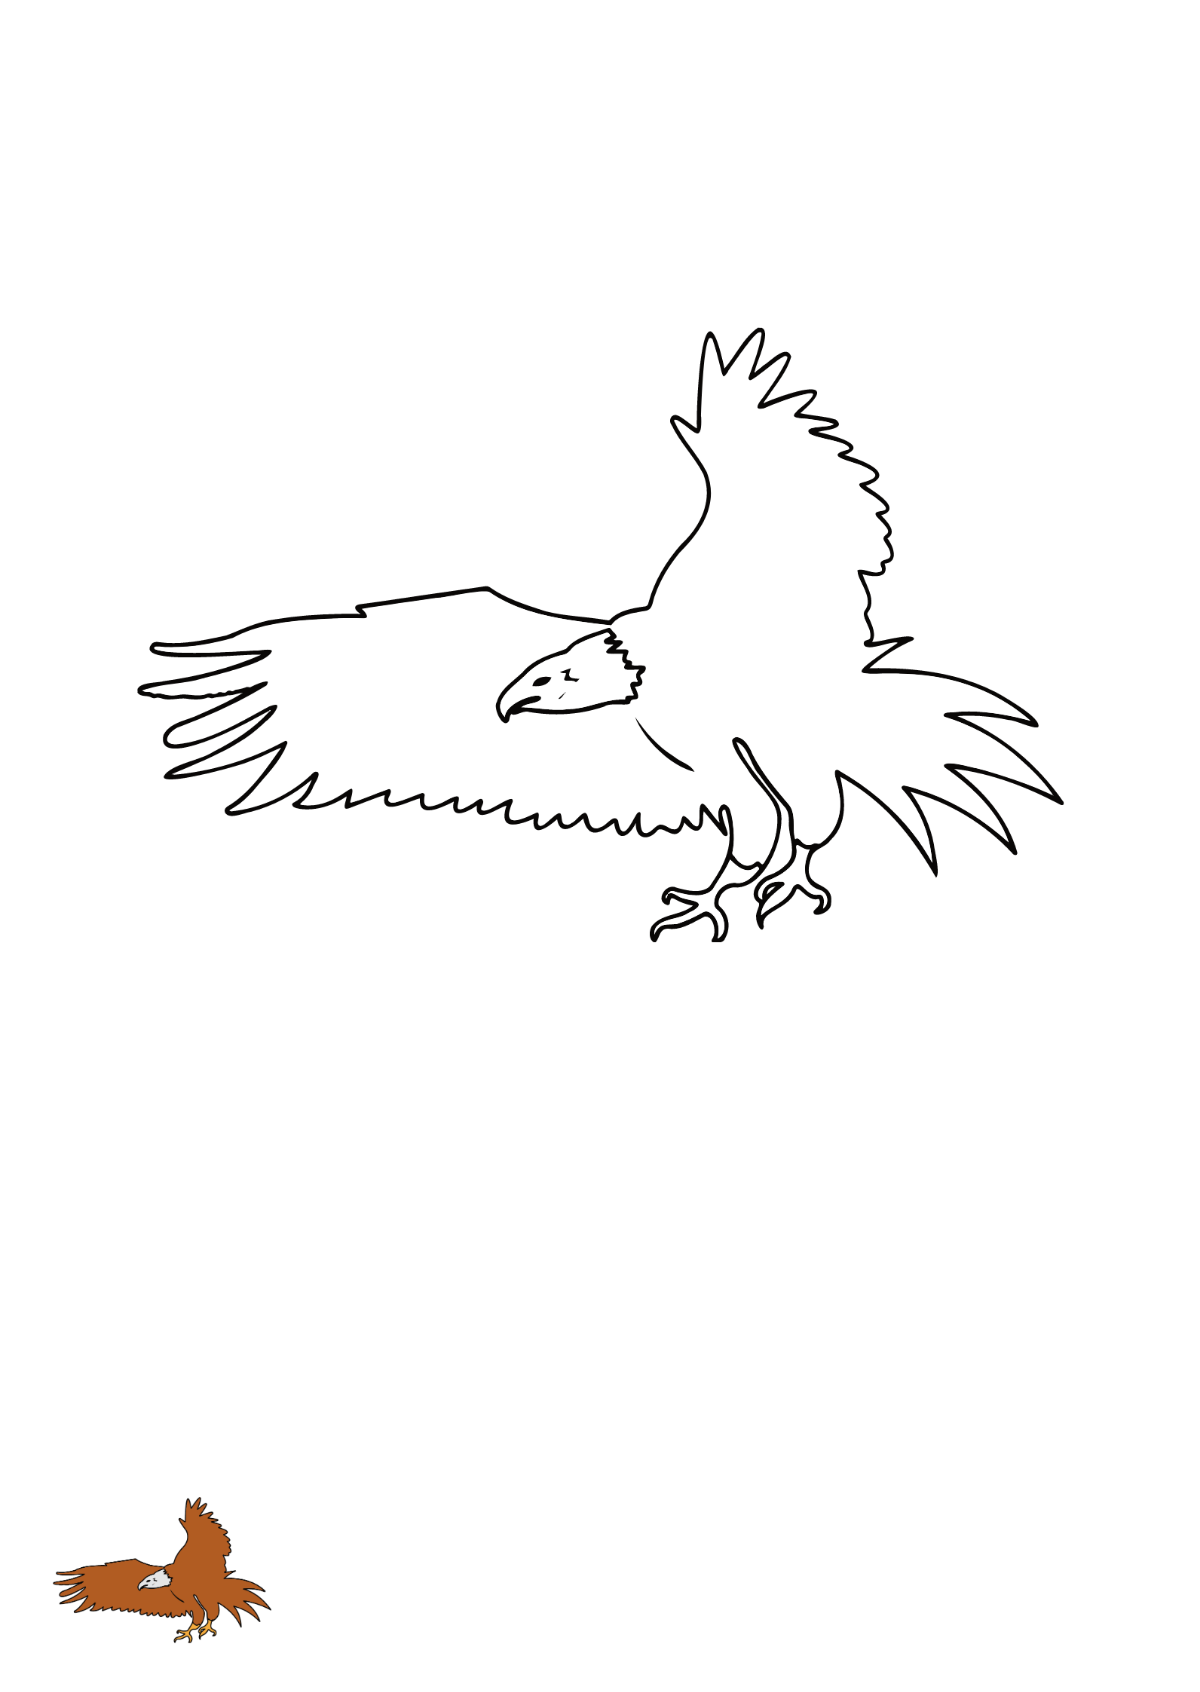 Soaring Eagle coloring page